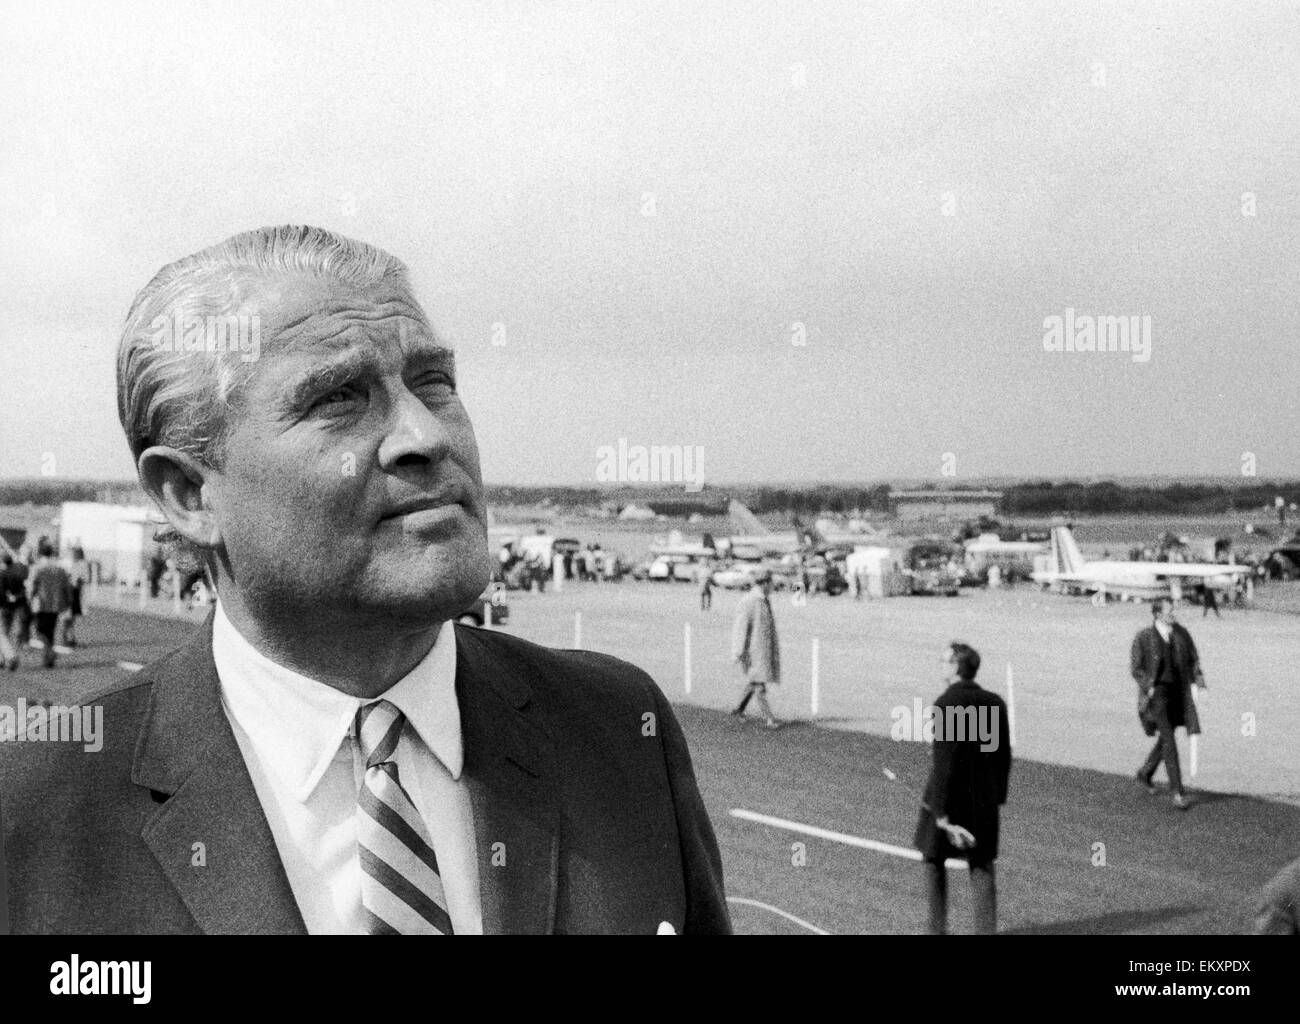 Wernher Von Braun the former German rocket scientist who is credited with the invention of the V2 rocket used to bombard London in the last year of the war. Who also created the Saturn V rocket that carried the American astronauts to the moon is seen here Stock Photo